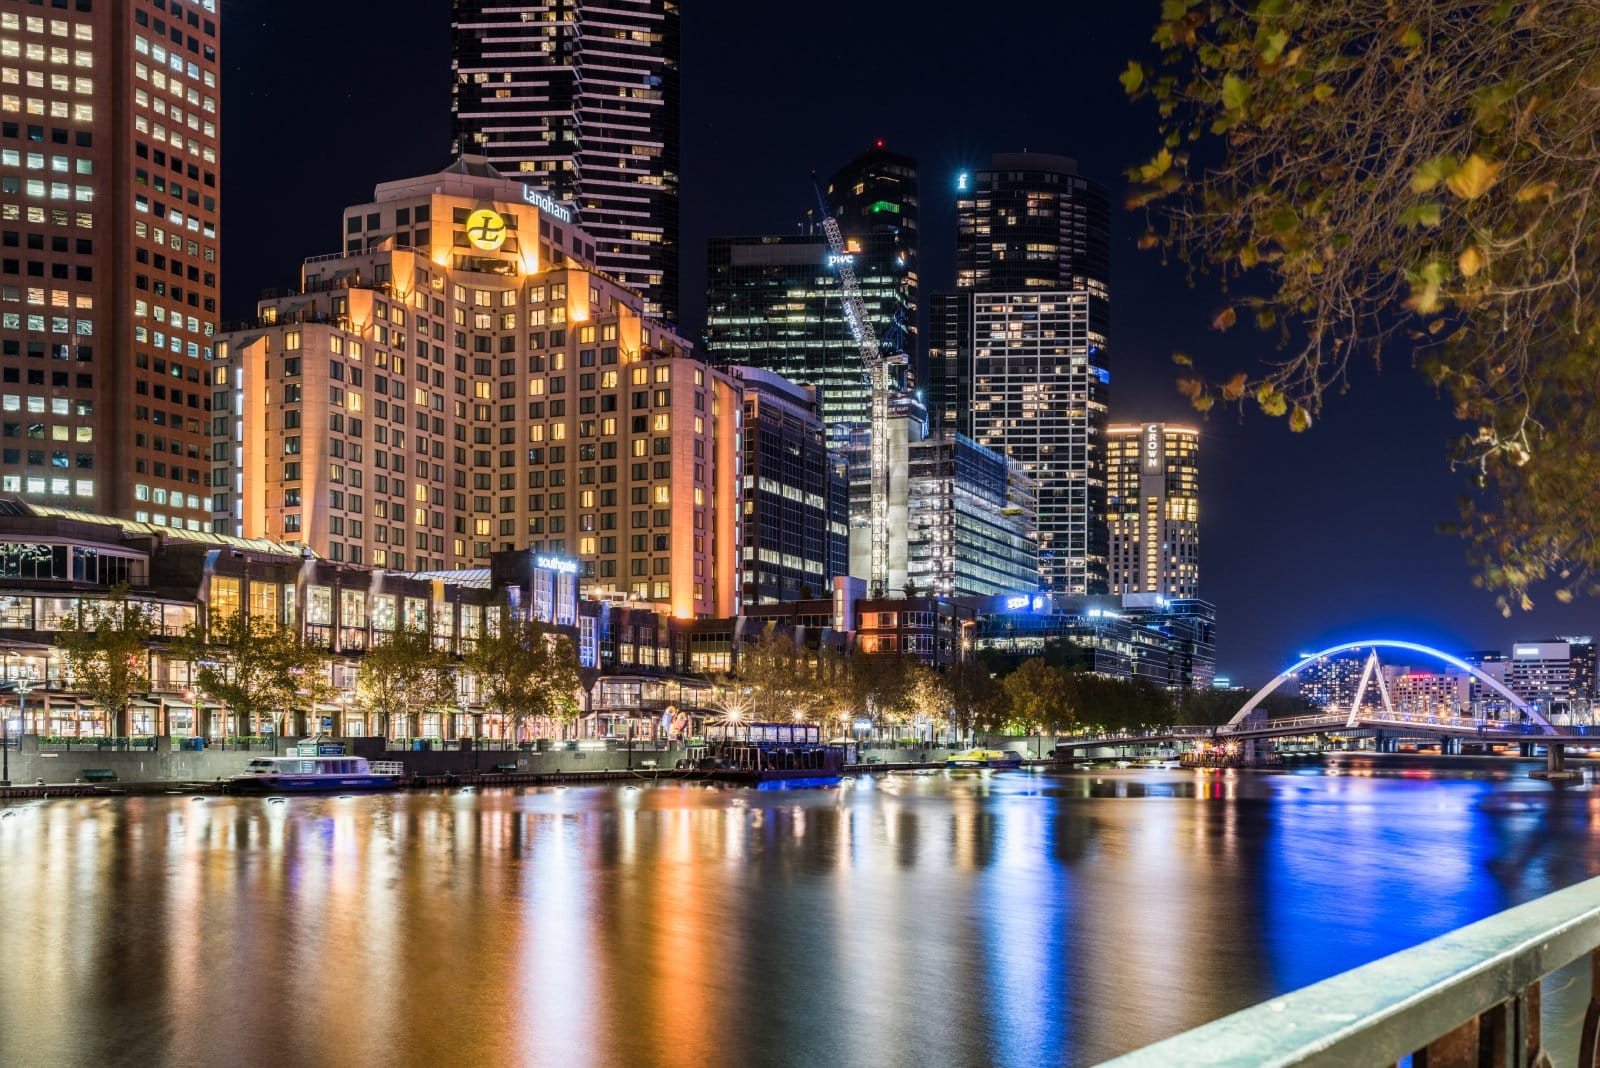 <p class="wp-caption-text">Image Credit: Pexels / Sarah Aktag</p>  <p><span>Melbourne, the coastal capital of Victoria, Australia, is celebrated for its artistic alleys, vibrant cultural scene, and a strong commitment to sustainability. The city excels in waste management, water conservation, and green building initiatives. Melbourne’s network of parks and gardens offers residents and visitors a green escape within the urban landscape, while its sustainability-focused restaurants and cafes promote local produce and ethical food practices. The city’s public transportation system, including trams, trains, and buses, efficiently explores Melbourne’s eclectic neighborhoods, renowned art galleries, and live music venues.</span></p>